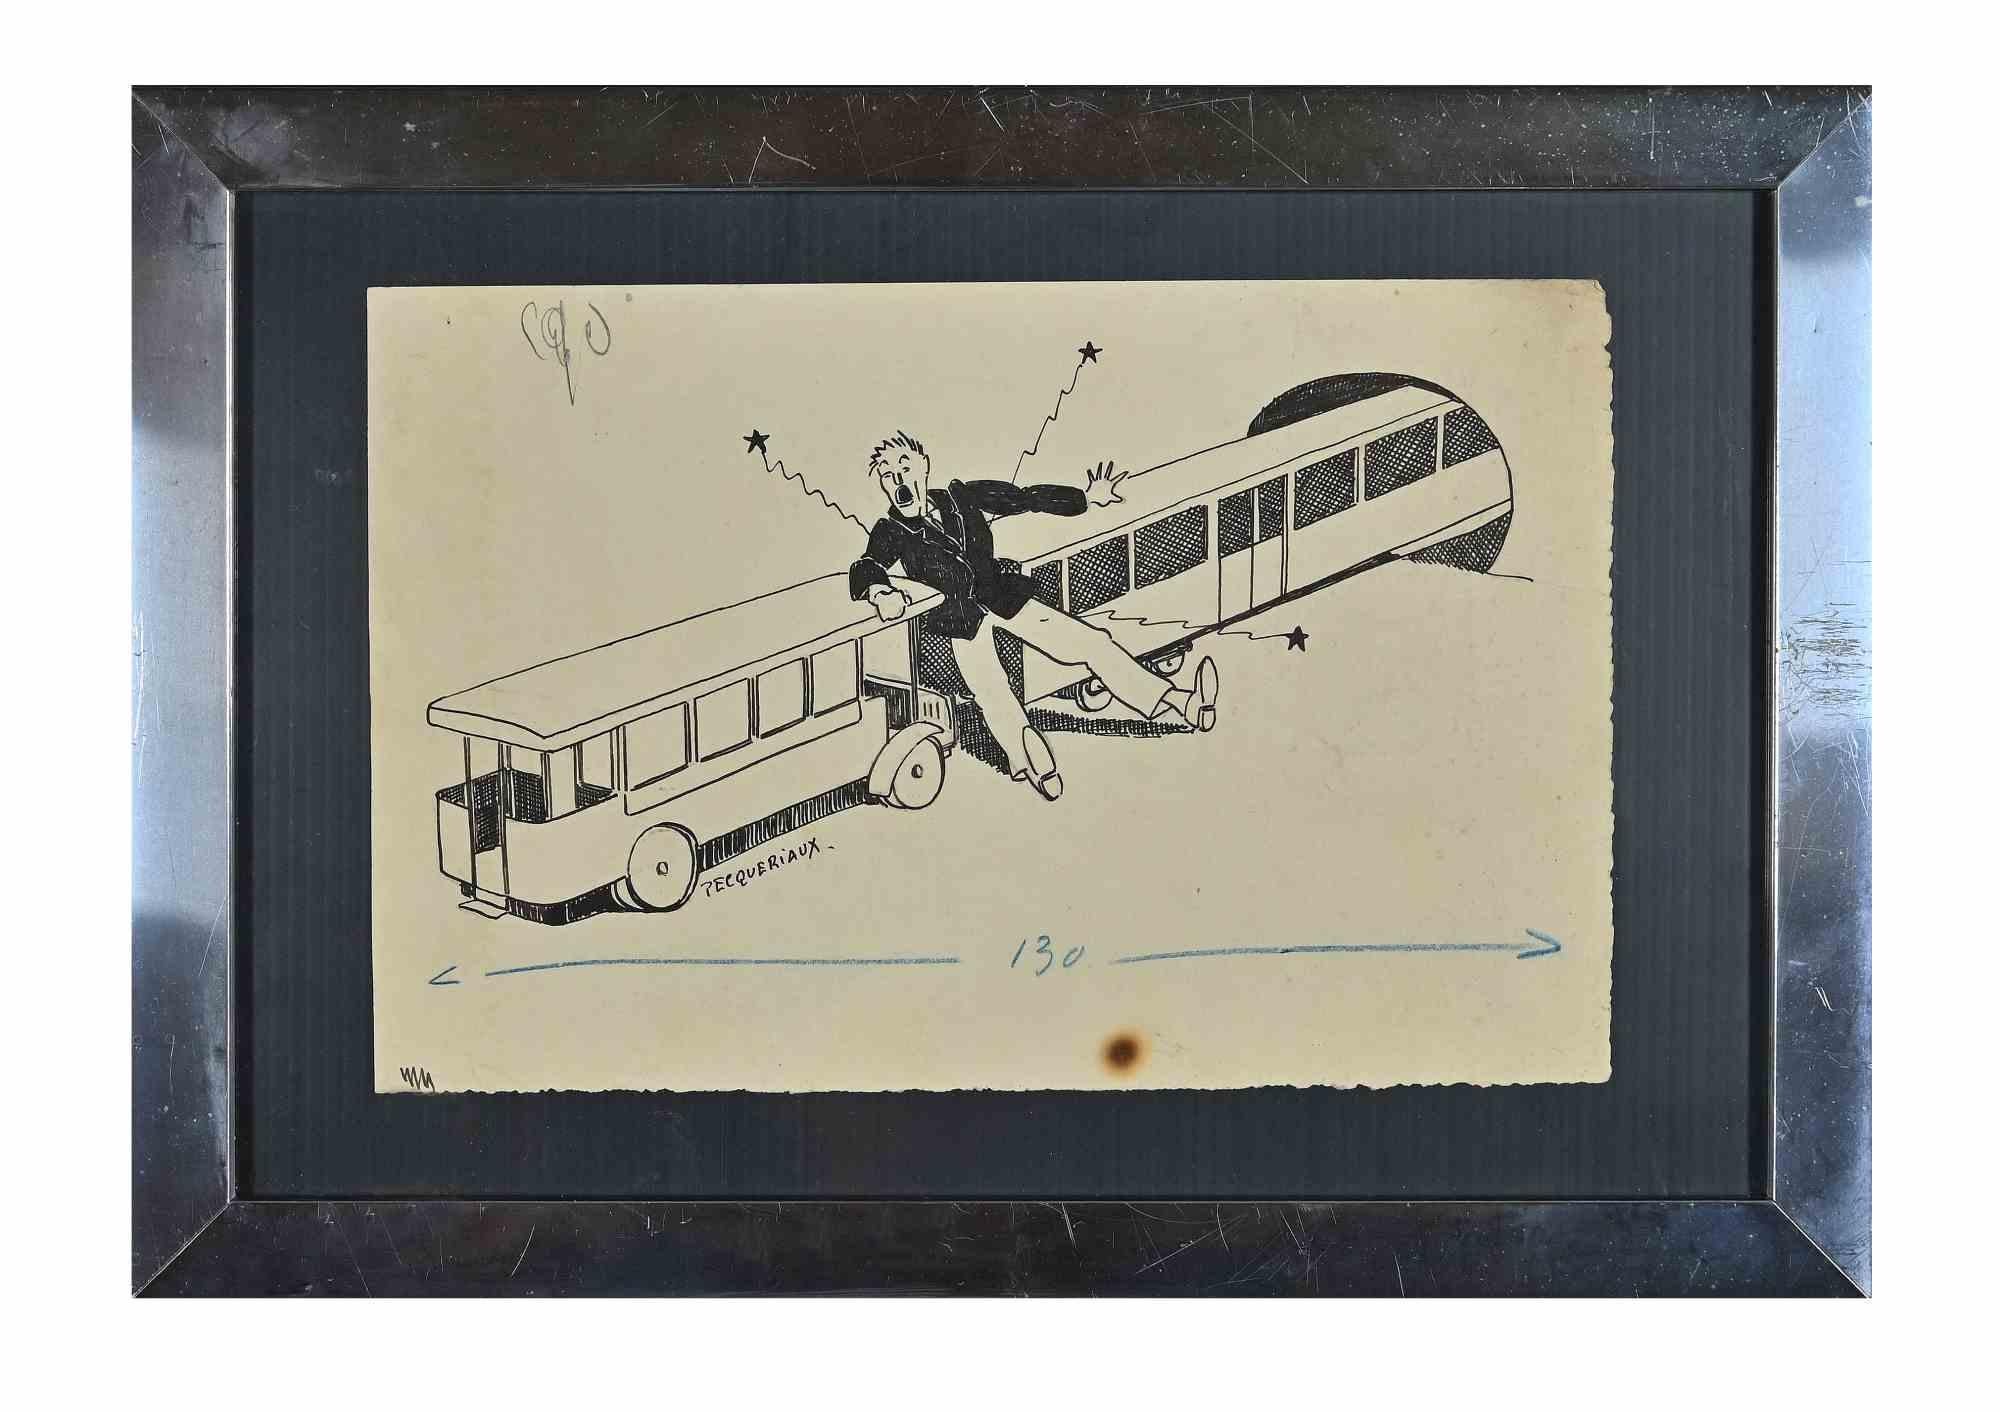 The train is an original modern artwork realized by Henri-Paul Pecqueriaux in the early 20th Century.

China ink drawing.

Han signed by the artist.

Mint conditions (a stain in the center and yellowing of paper).

Includes metal frame (mint